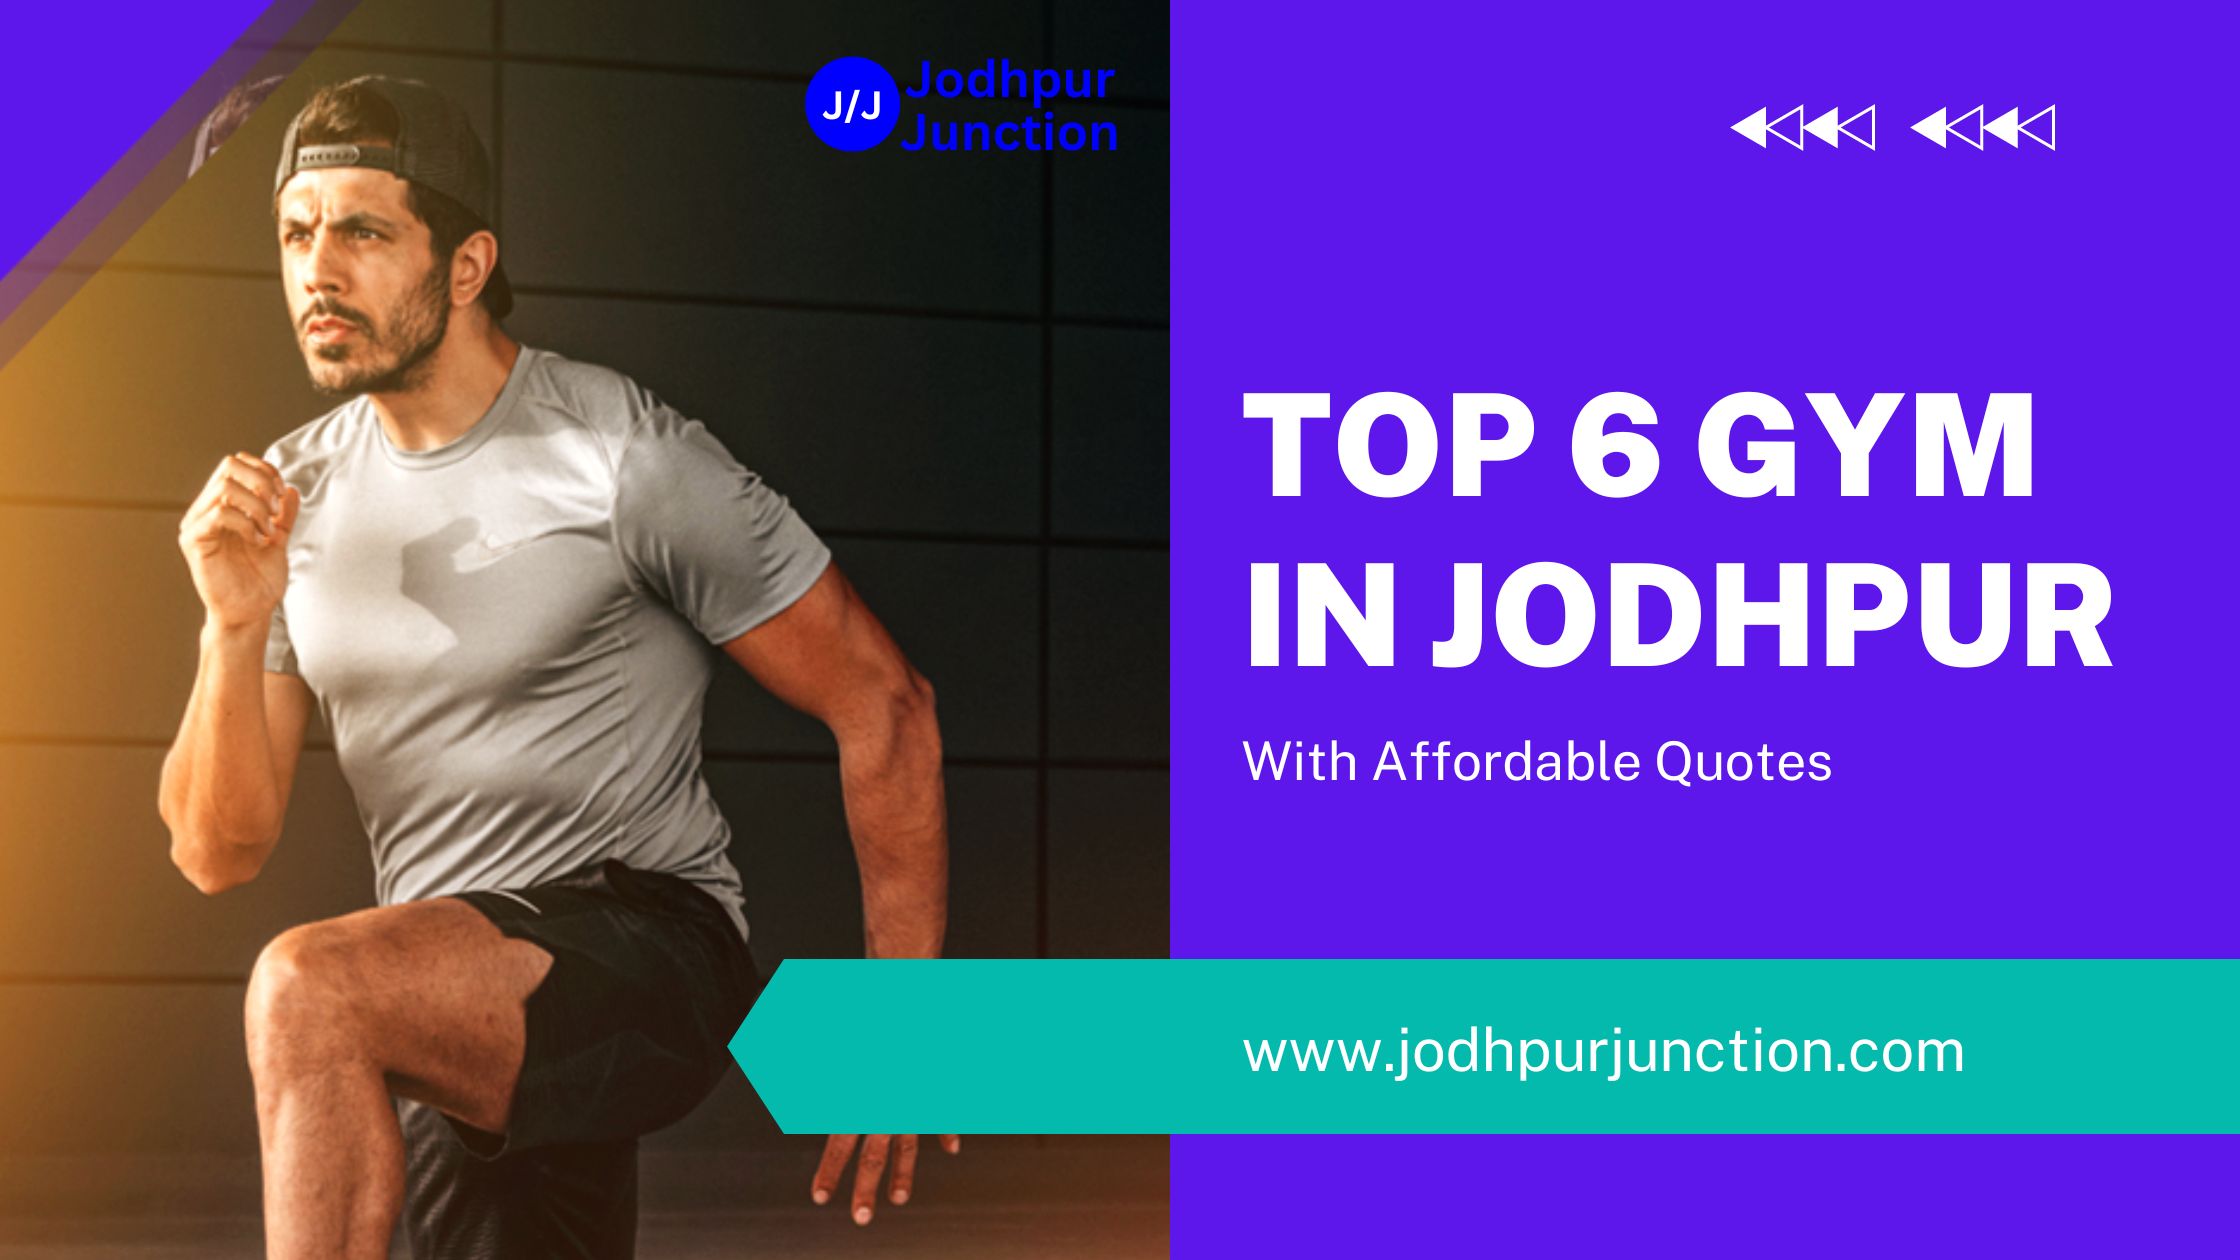 Top 6 Gym in Jodhpur With Affordable Quotes